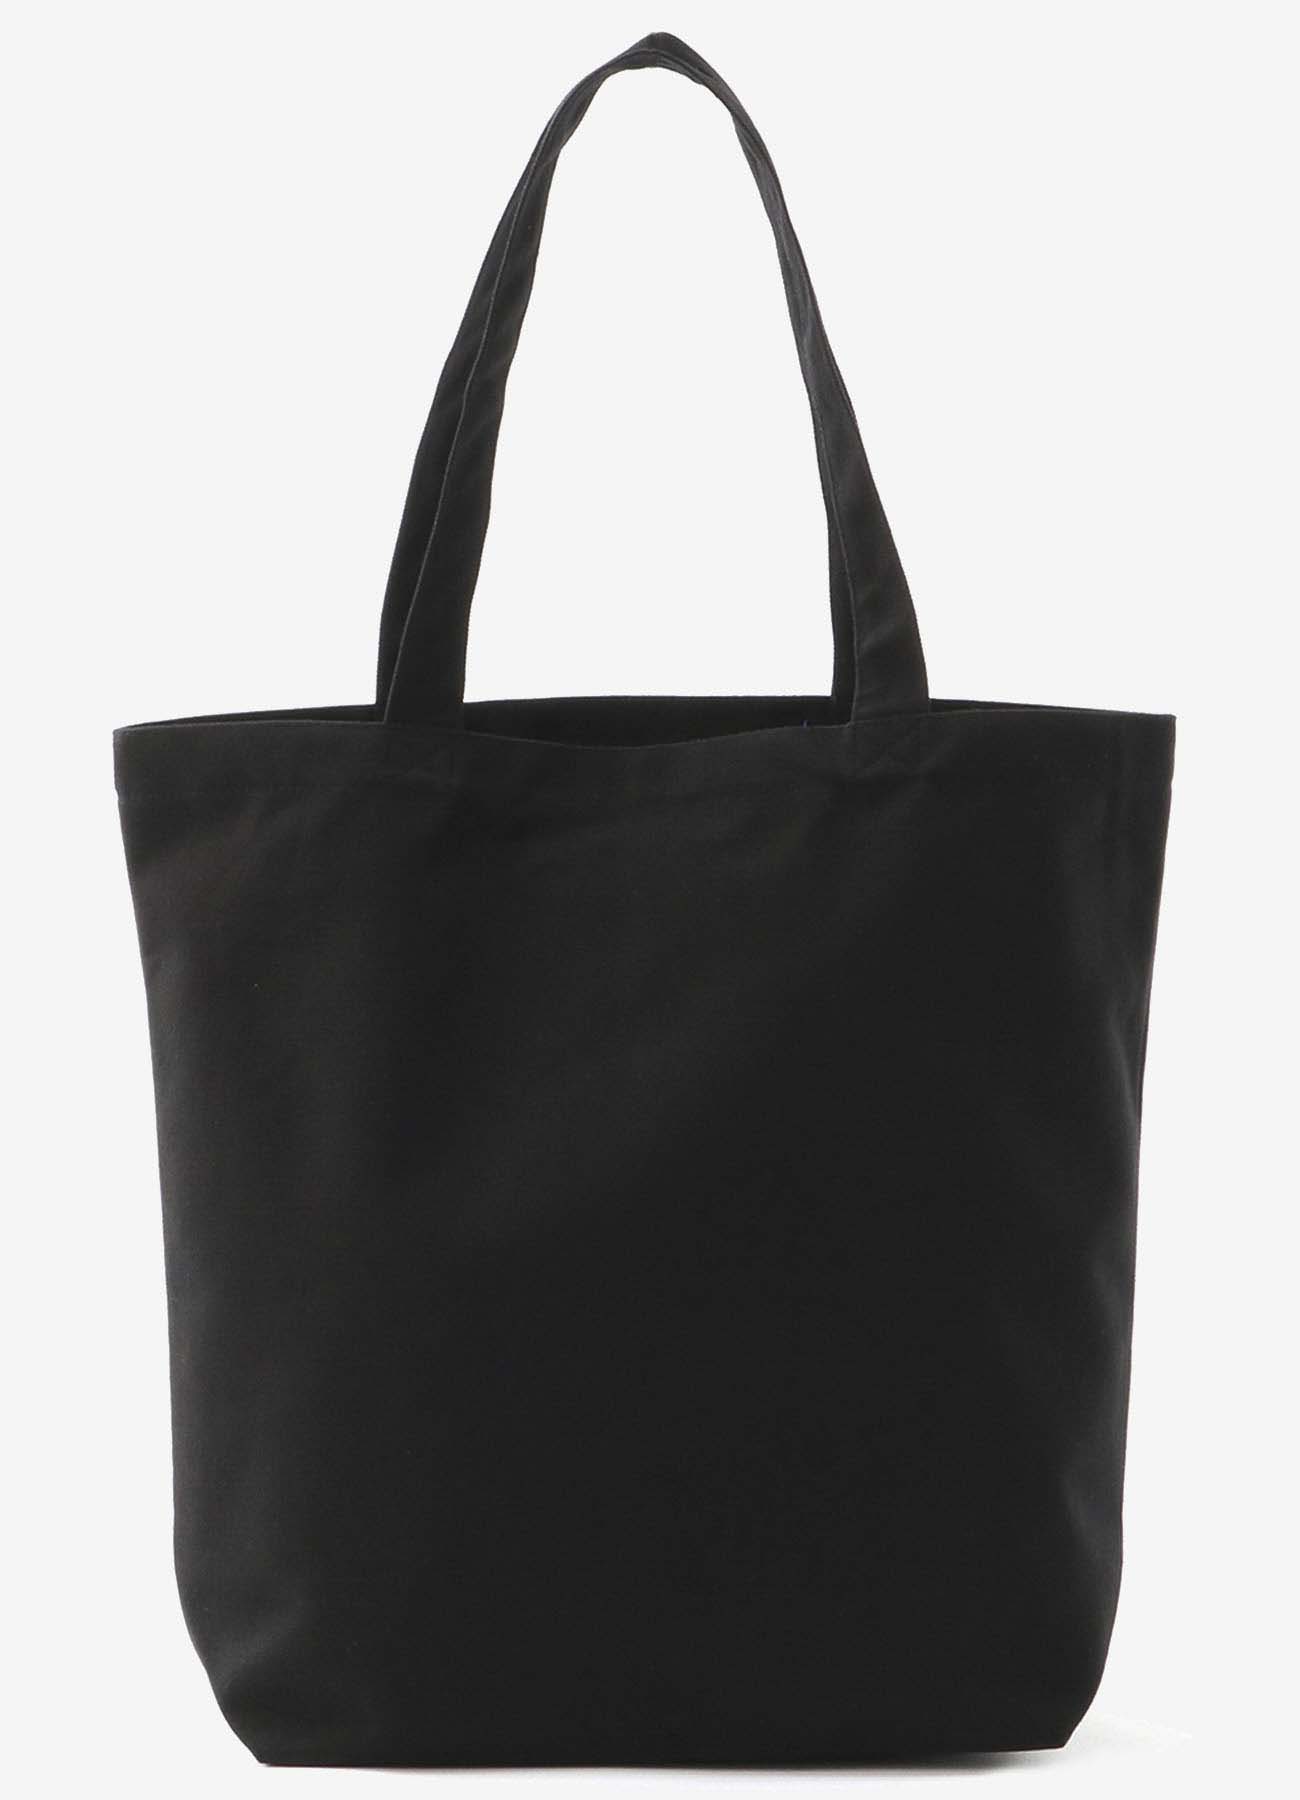 「Black Is Modest」Message tote